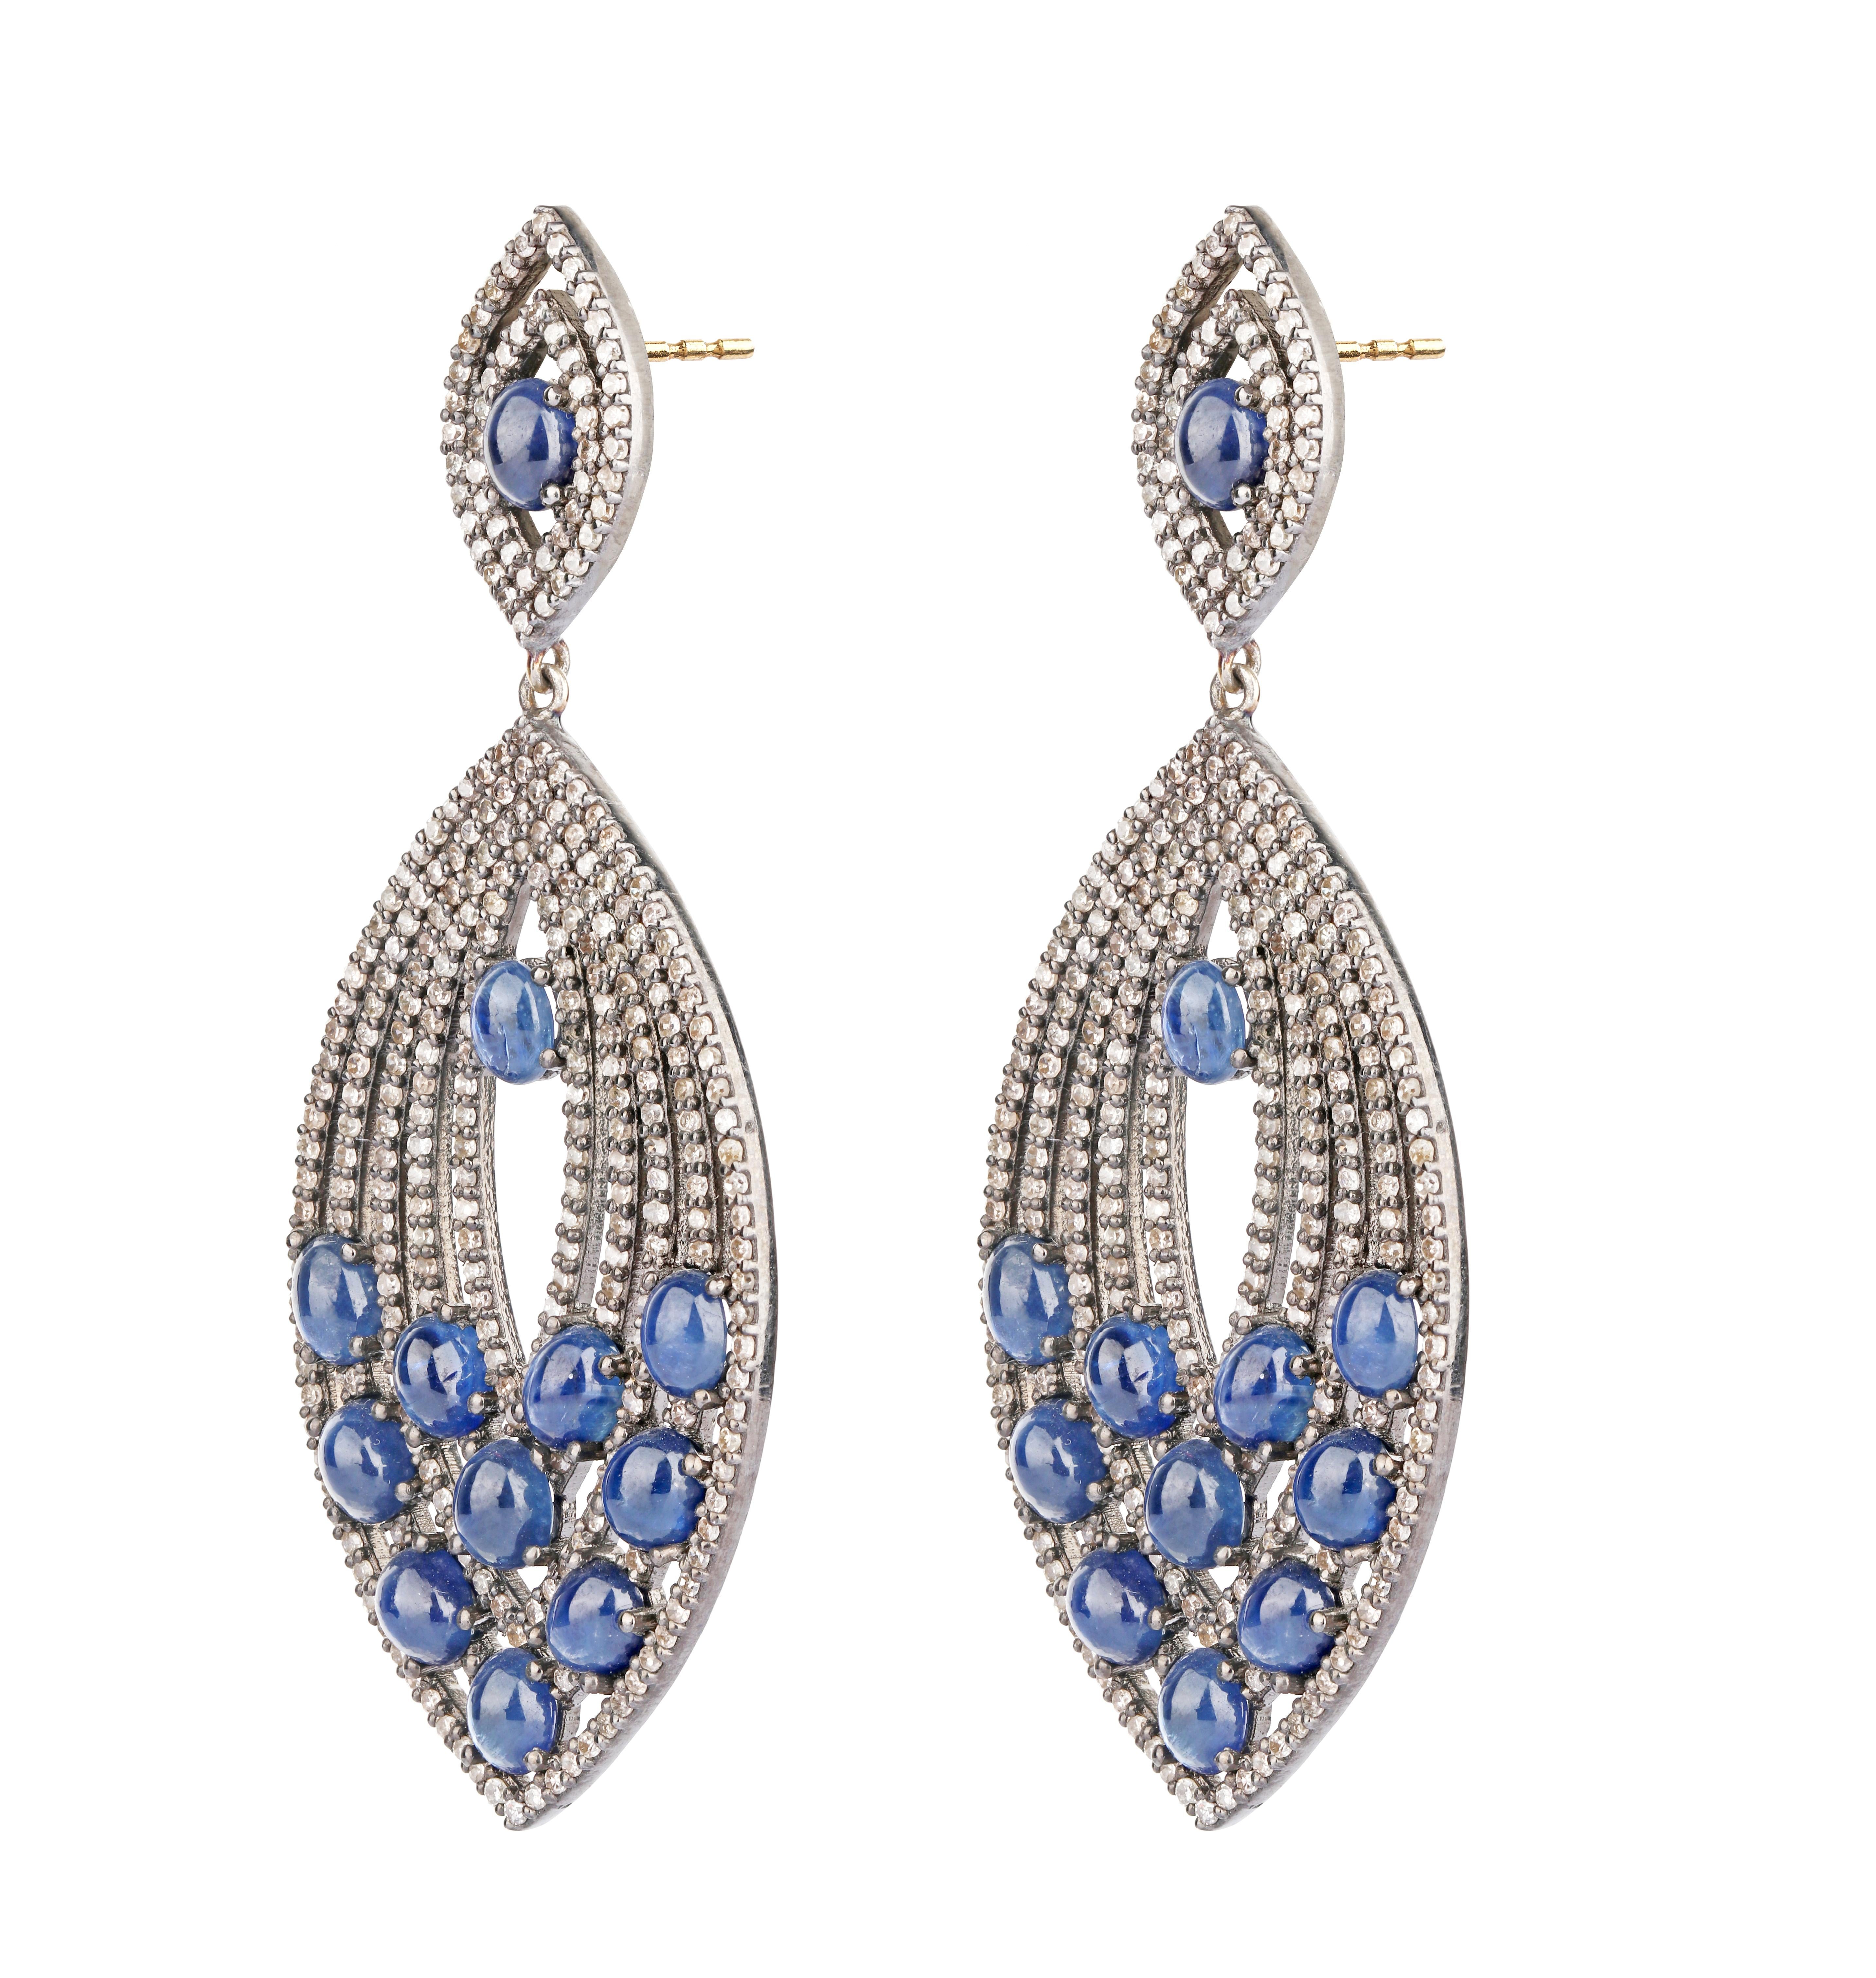 19.27 carats Sapphire and Diamond Dangle Earrings

Nothing glams a party better than some exquisite pieces of jewelry to adorn. A perfect combination of some finest diamonds and gemstones is all you need to look your most graceful at any party. You